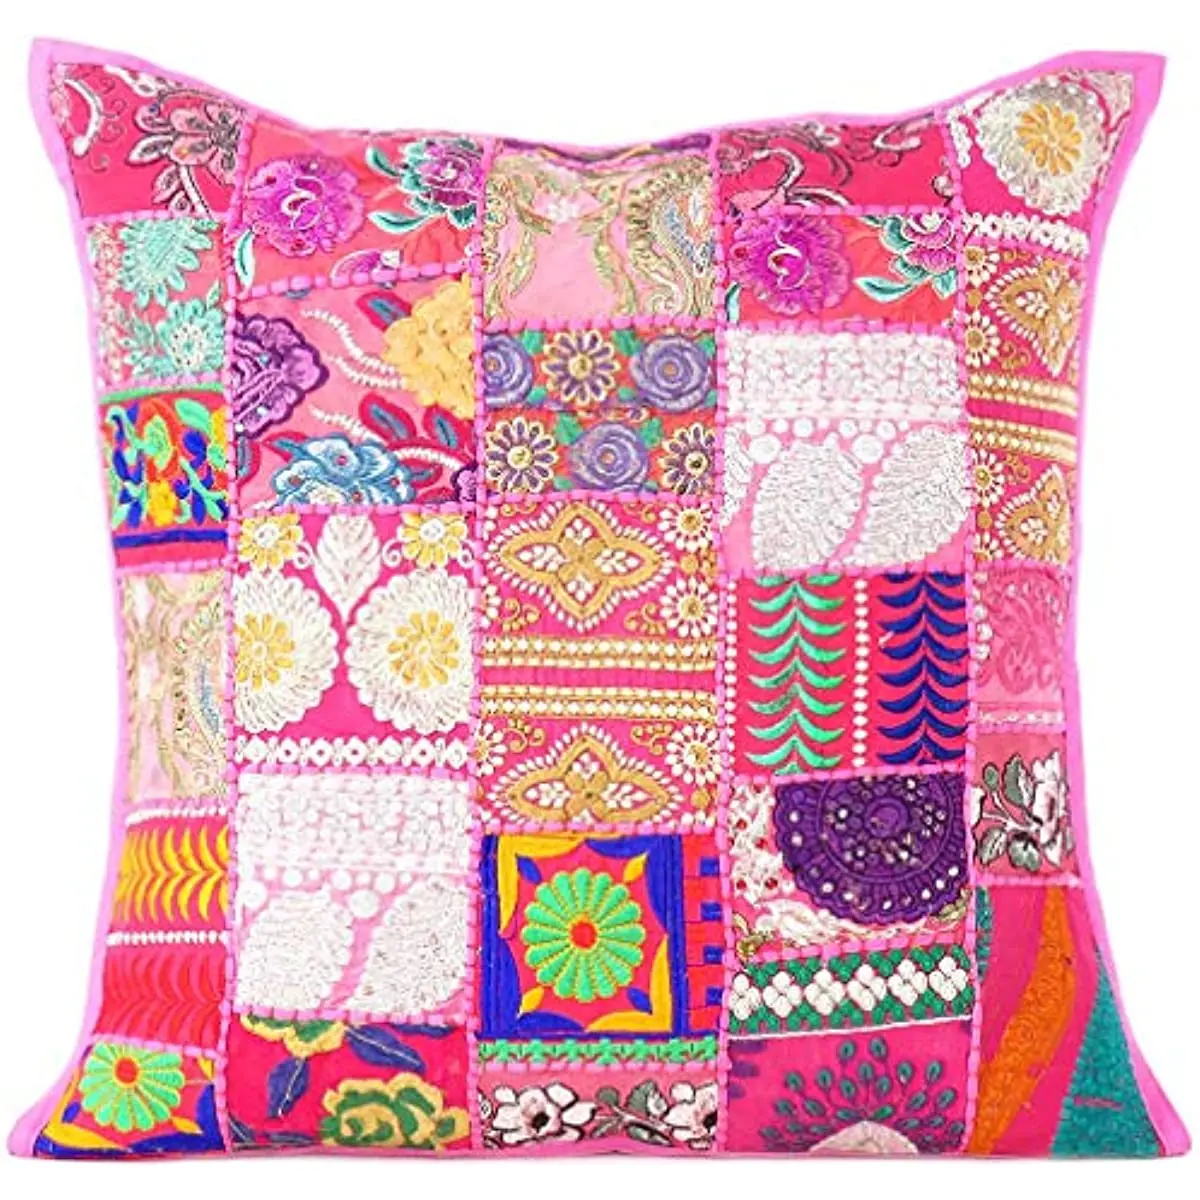 

Eyes of India Decorative Patchwork Boho Throw Pillow Cover Colorful Handmade Accent Bedroom Living Room